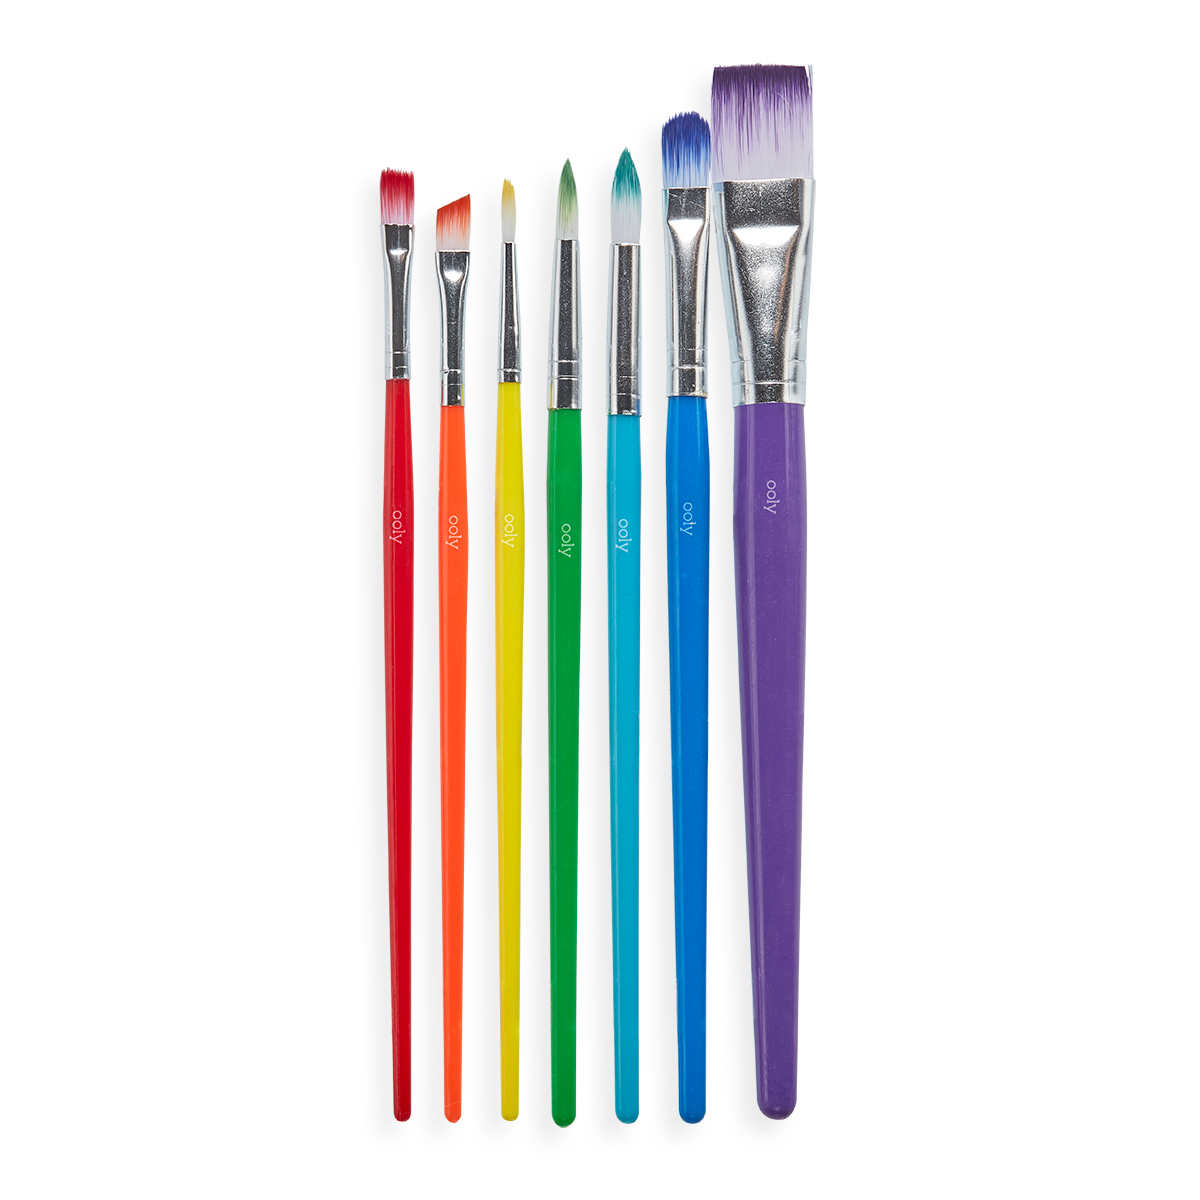 Touch-Up Paint Brushes - 12 Pack (Assorted Sizes)